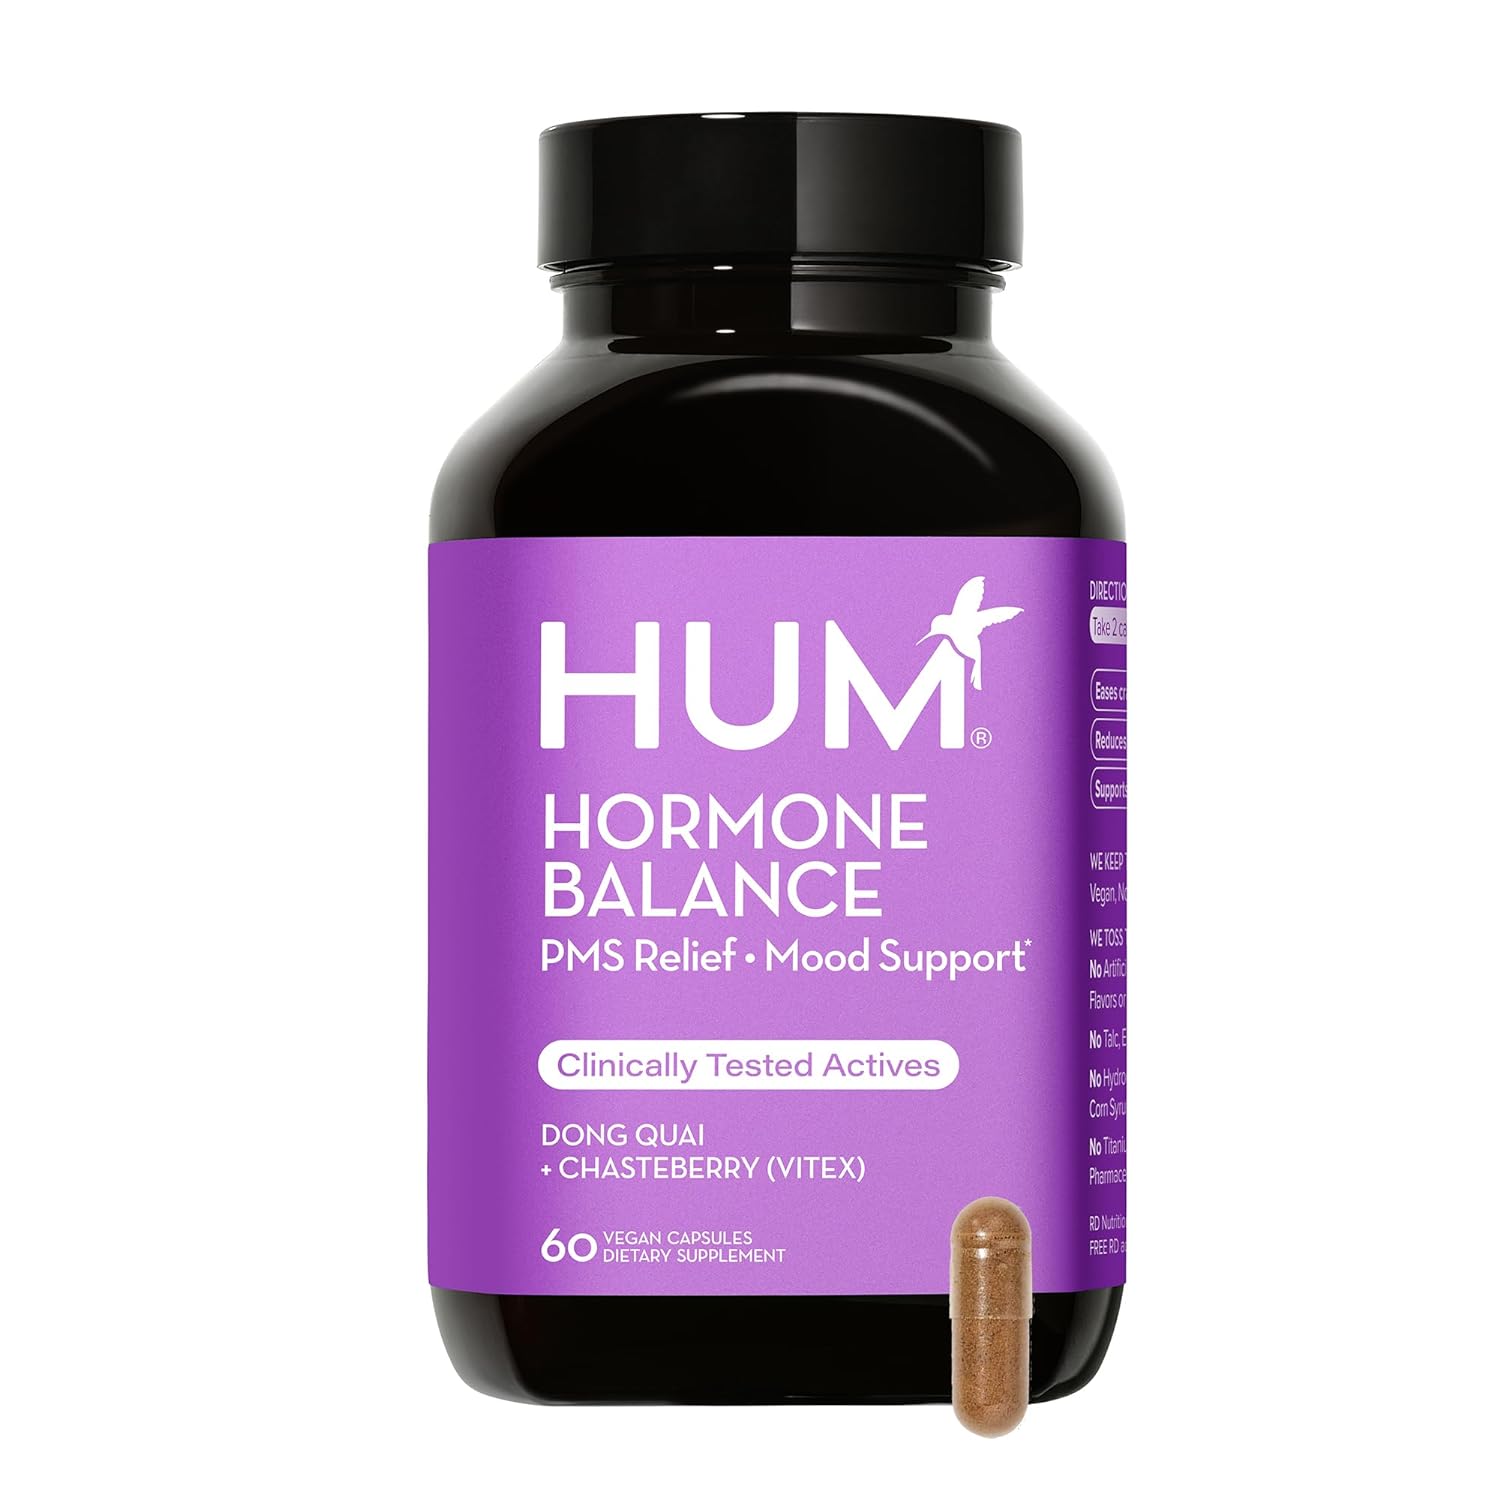 HUM Hormone Balance - Mood Booster Supplement for Women - Support for